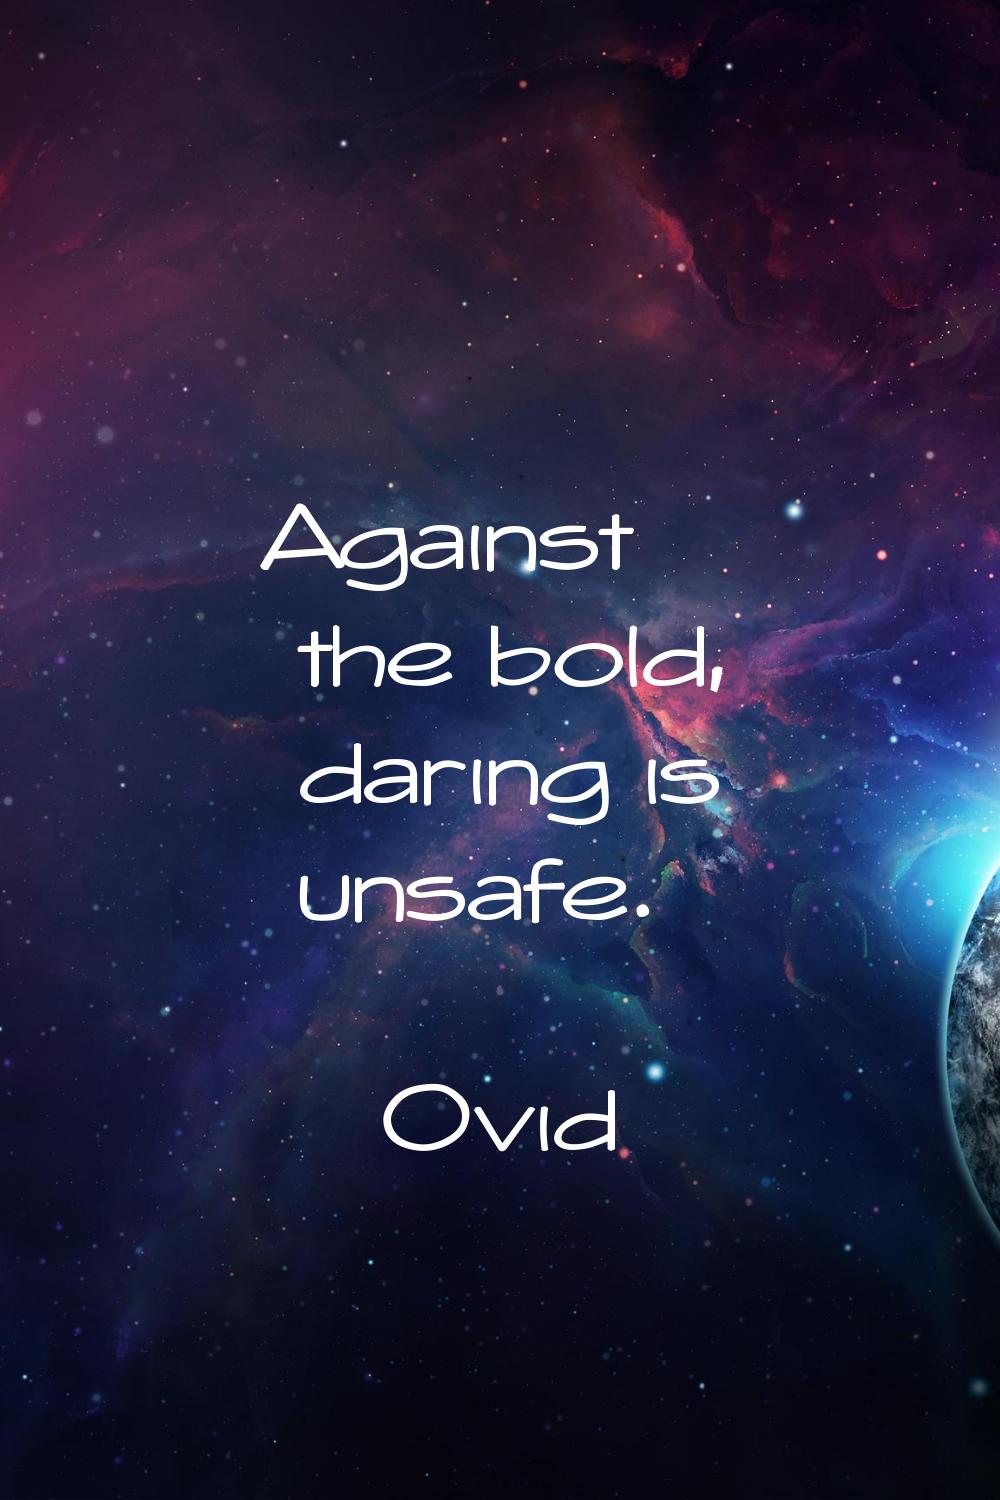 Against the bold, daring is unsafe.